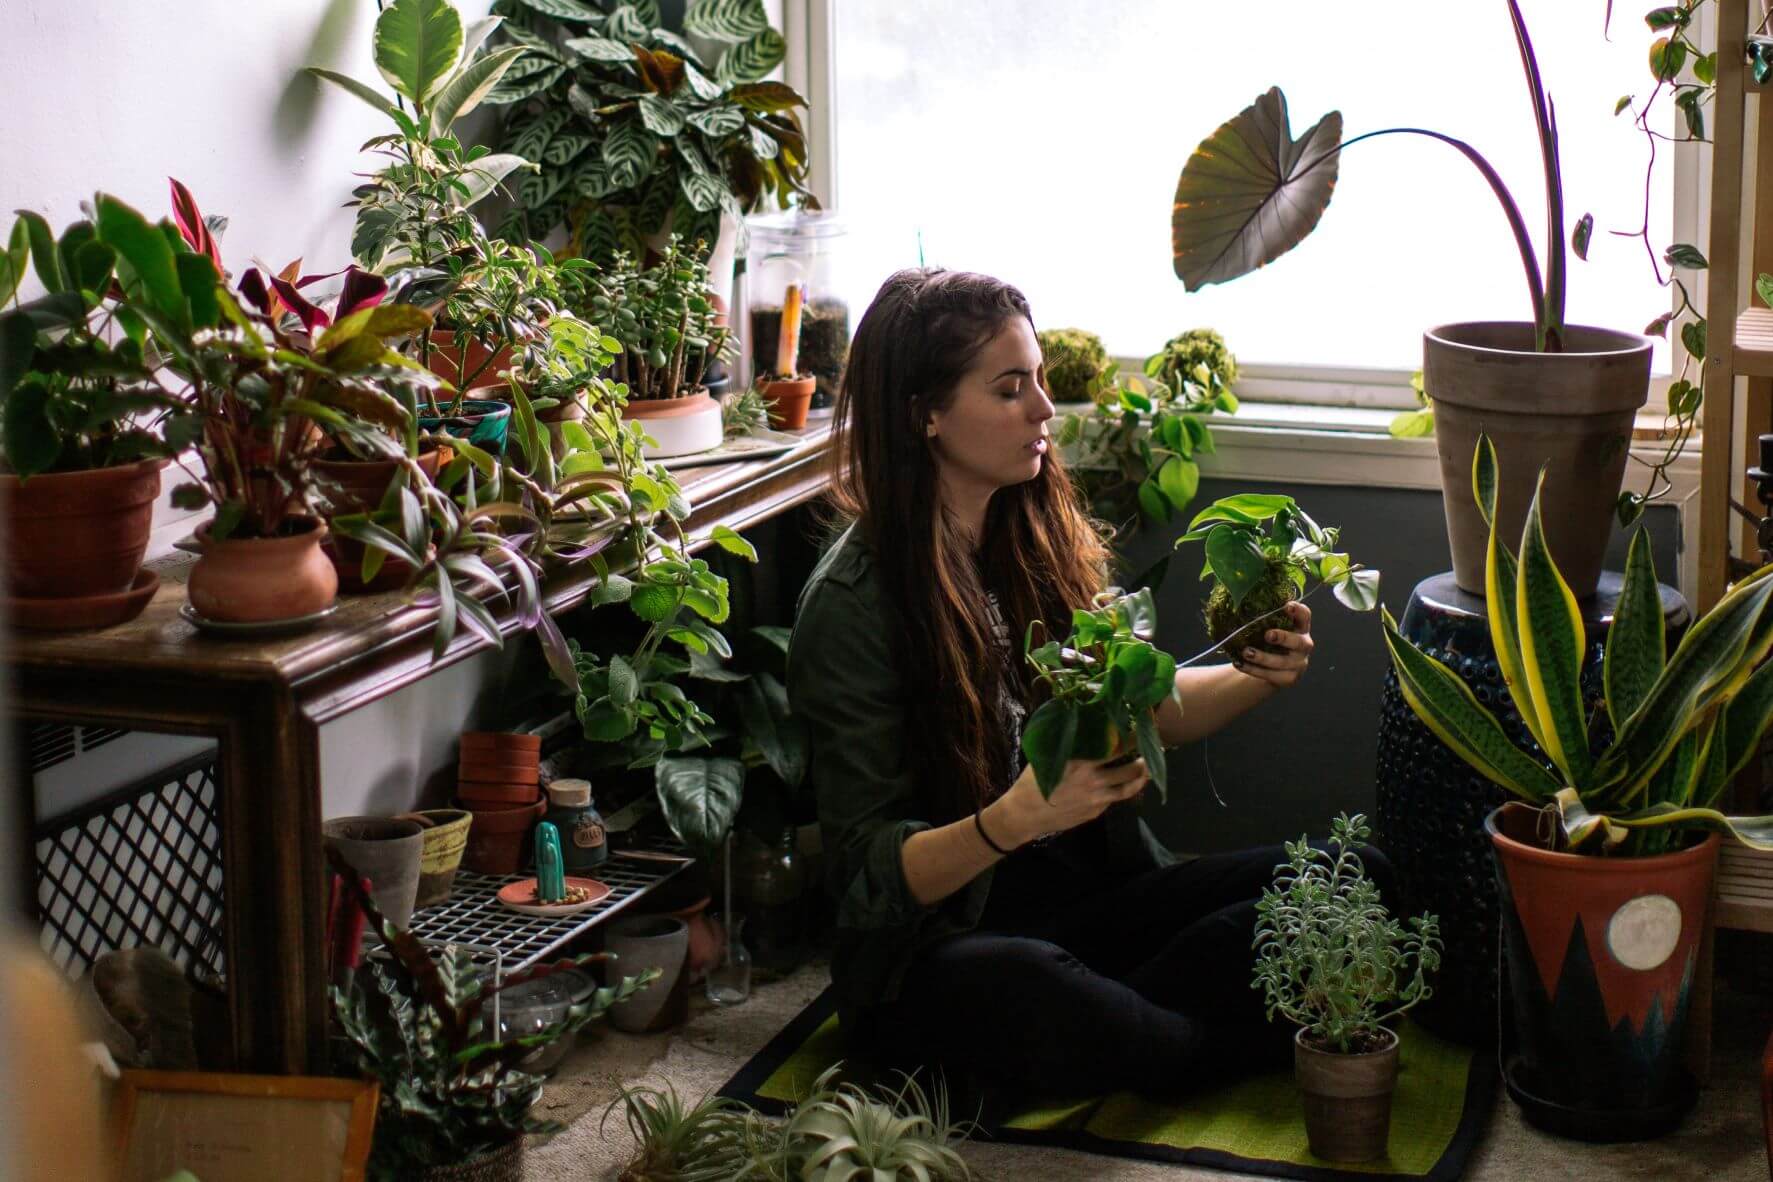 woman sitting on floor with plants